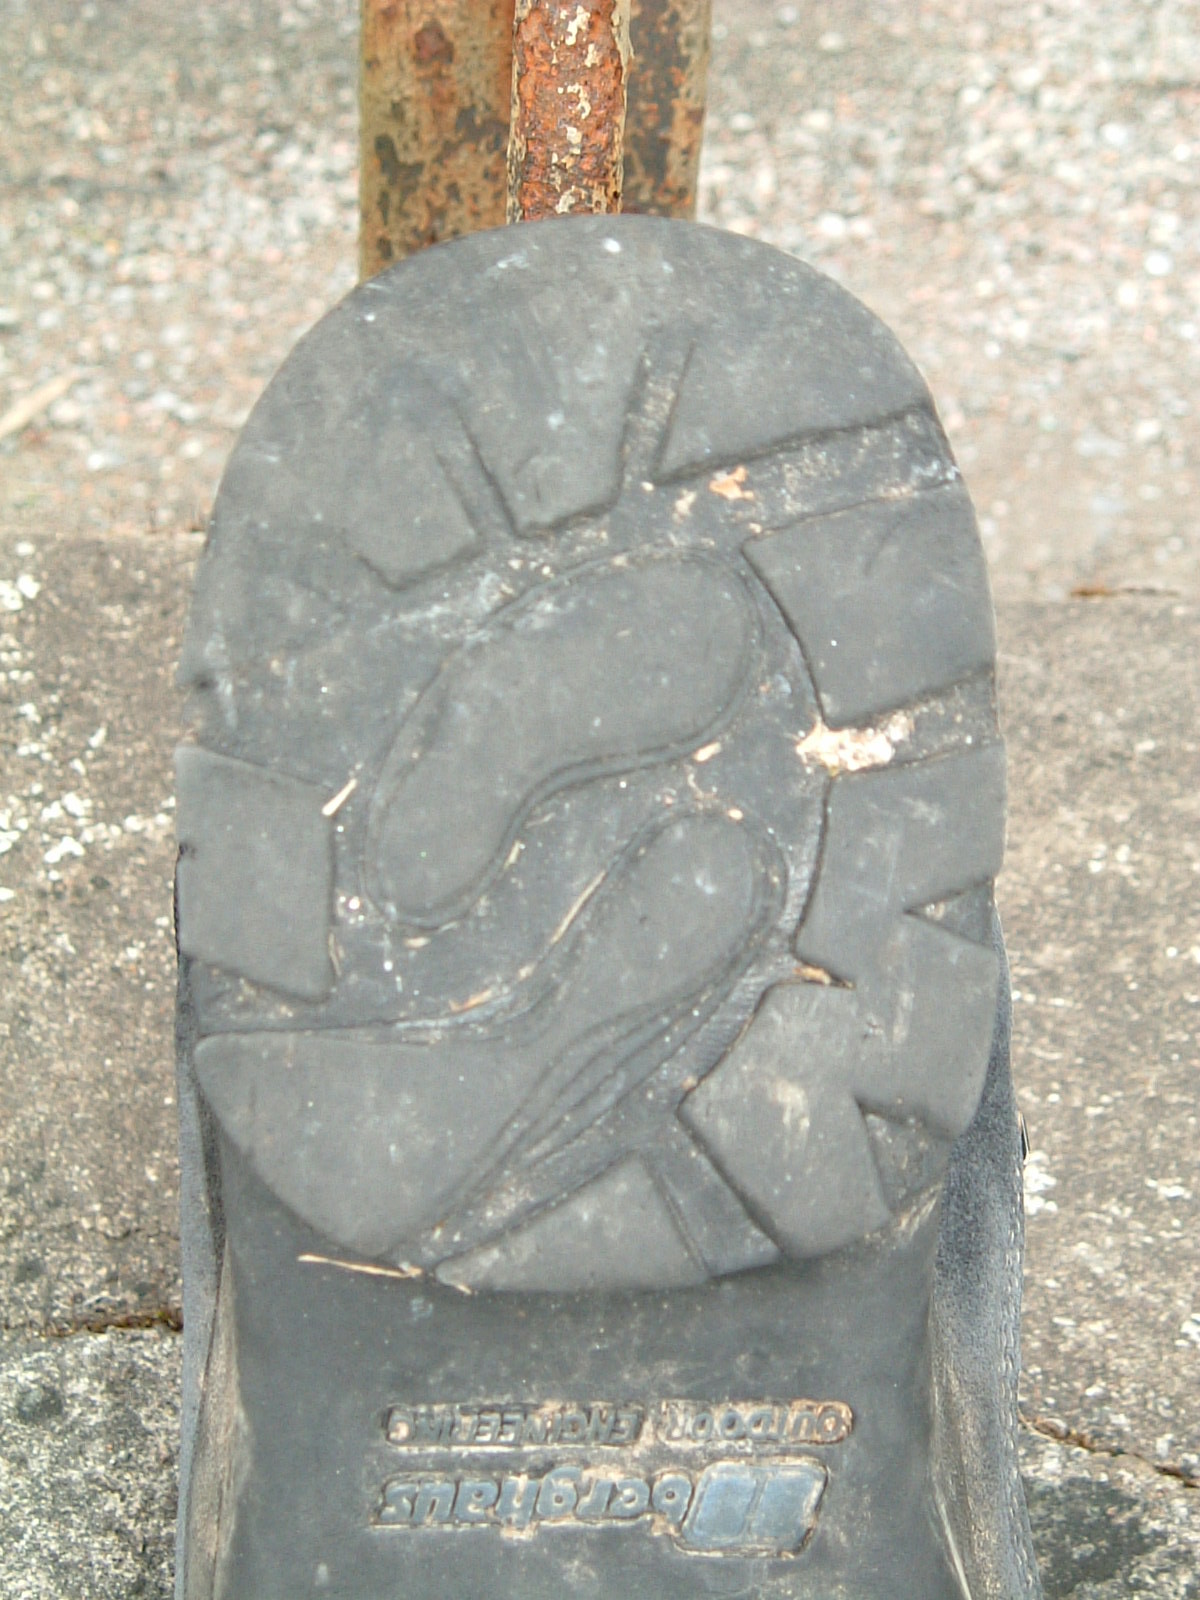 The rear sole of my left boot